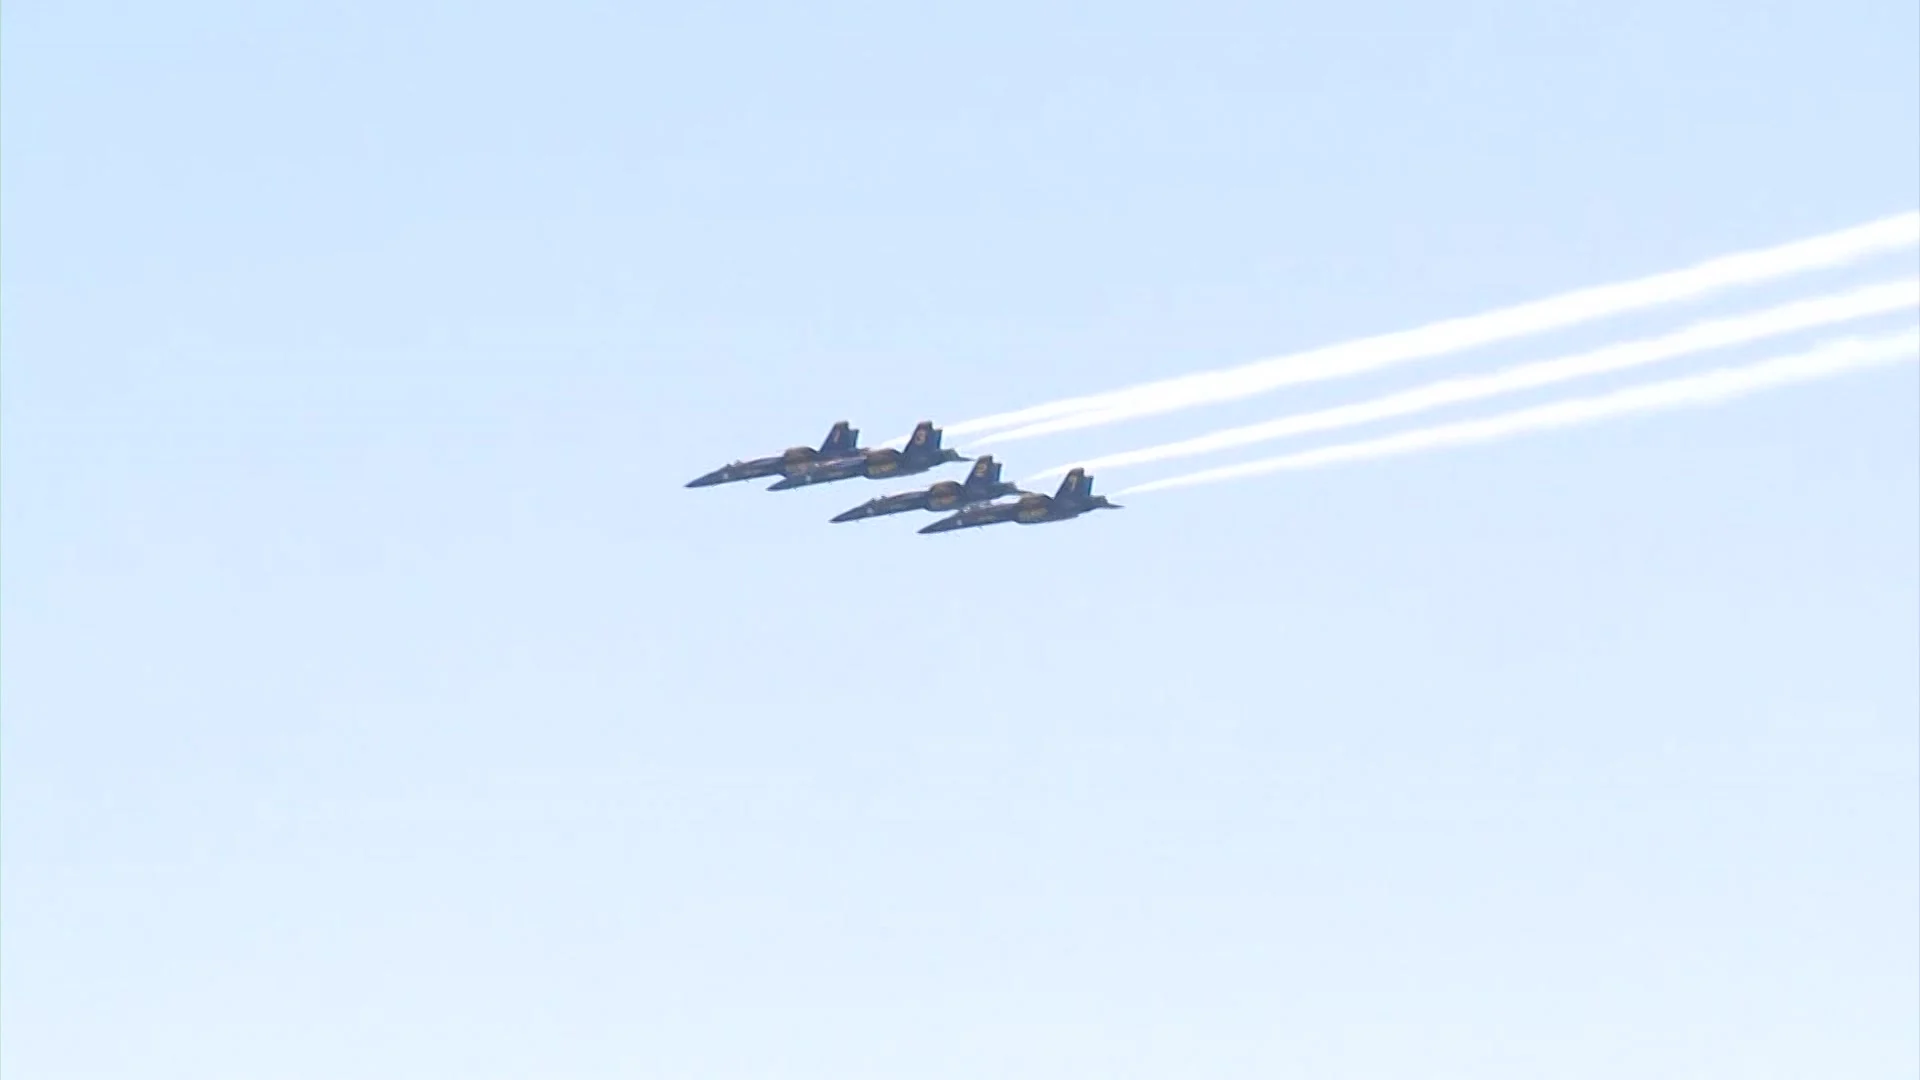 Record crowds of over 106,000 watch practice show of Bethpage Air Show 